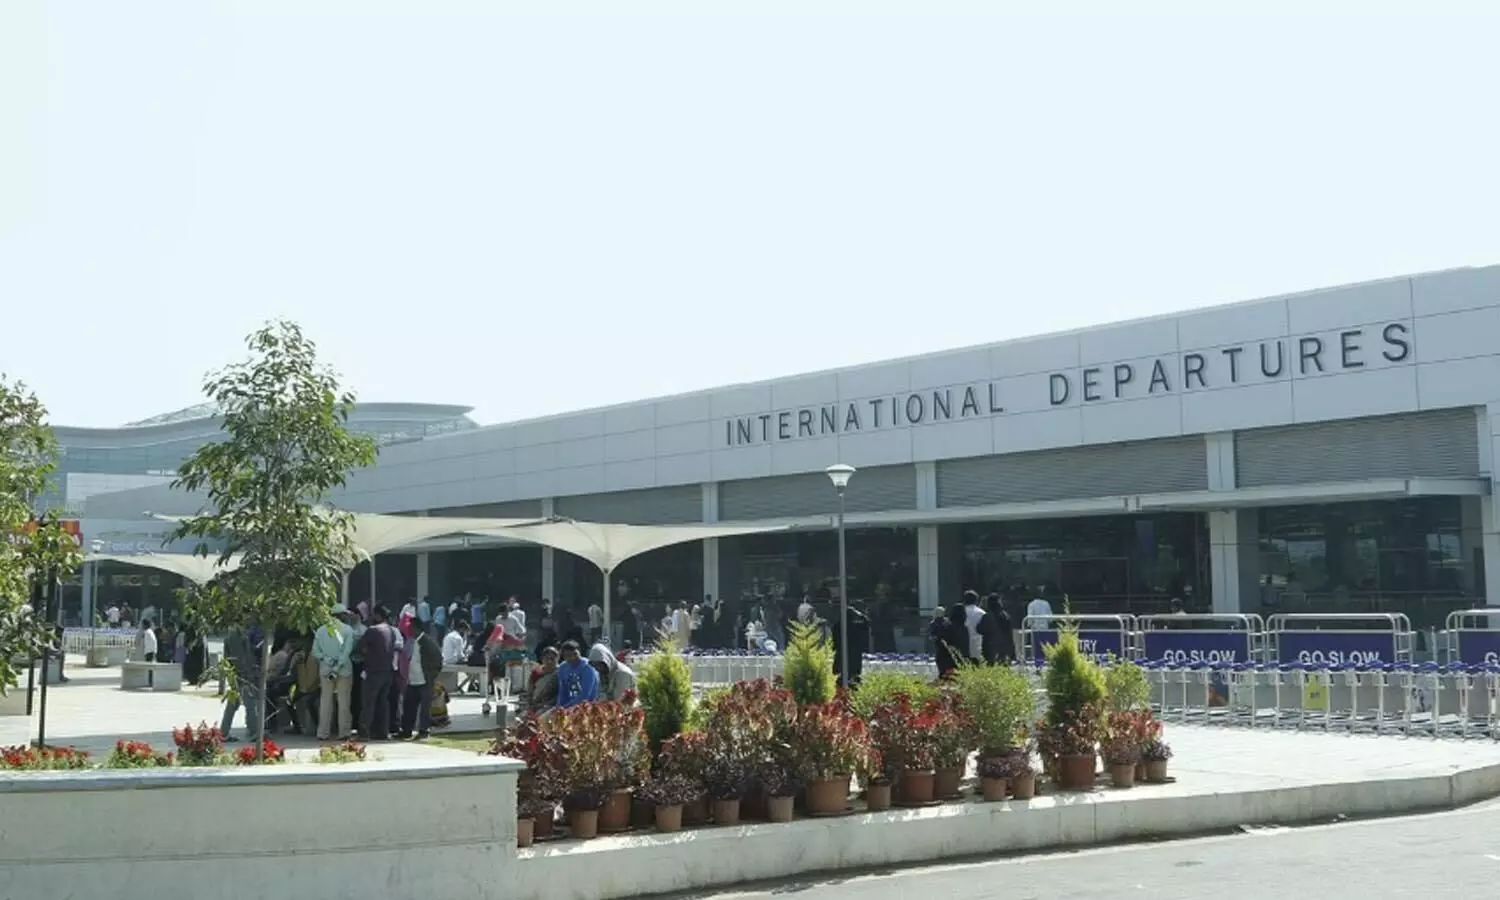 International departures to be moved to main building in RGIA as part of GHIAL expansion works